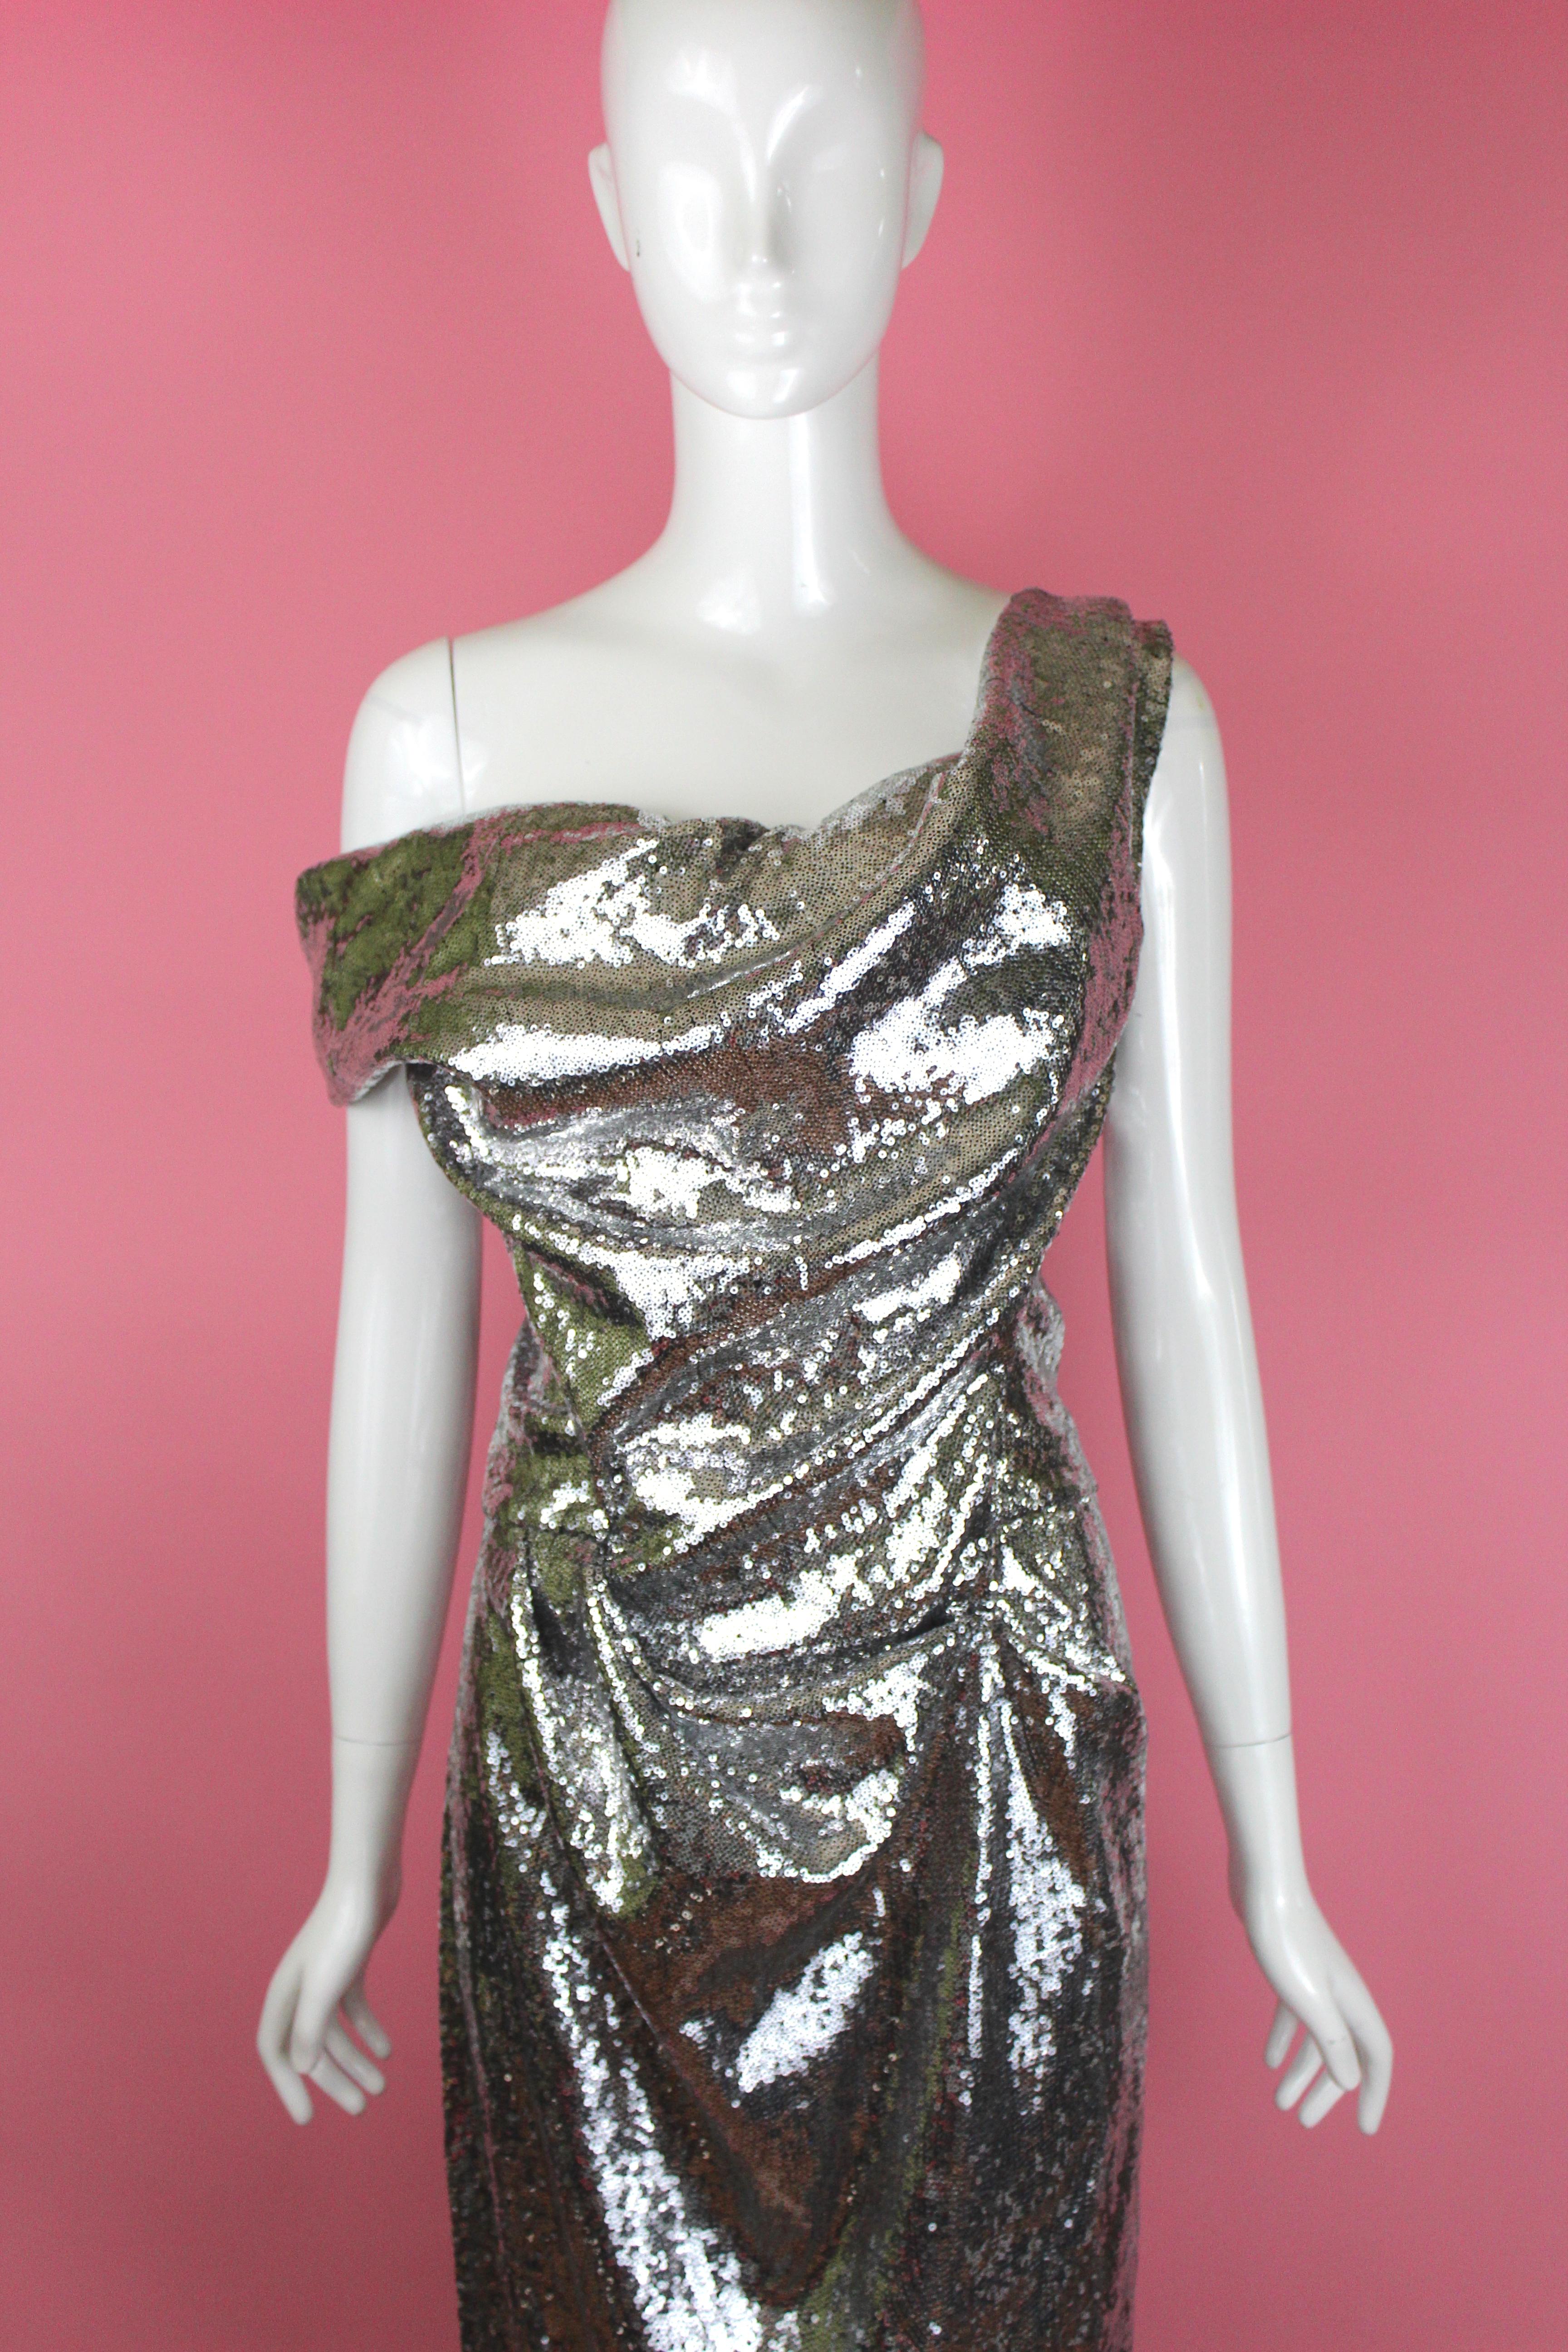 -Gorgeous gown from Vivienne Westwood, in the 'Cocotte' style that was made popular in the mid-90's. 
-Gown is made of micro-paillettes and creates a liquid metal look when worn.
-Sized US 12 / UK 16, running true to size 
-Made in Italy